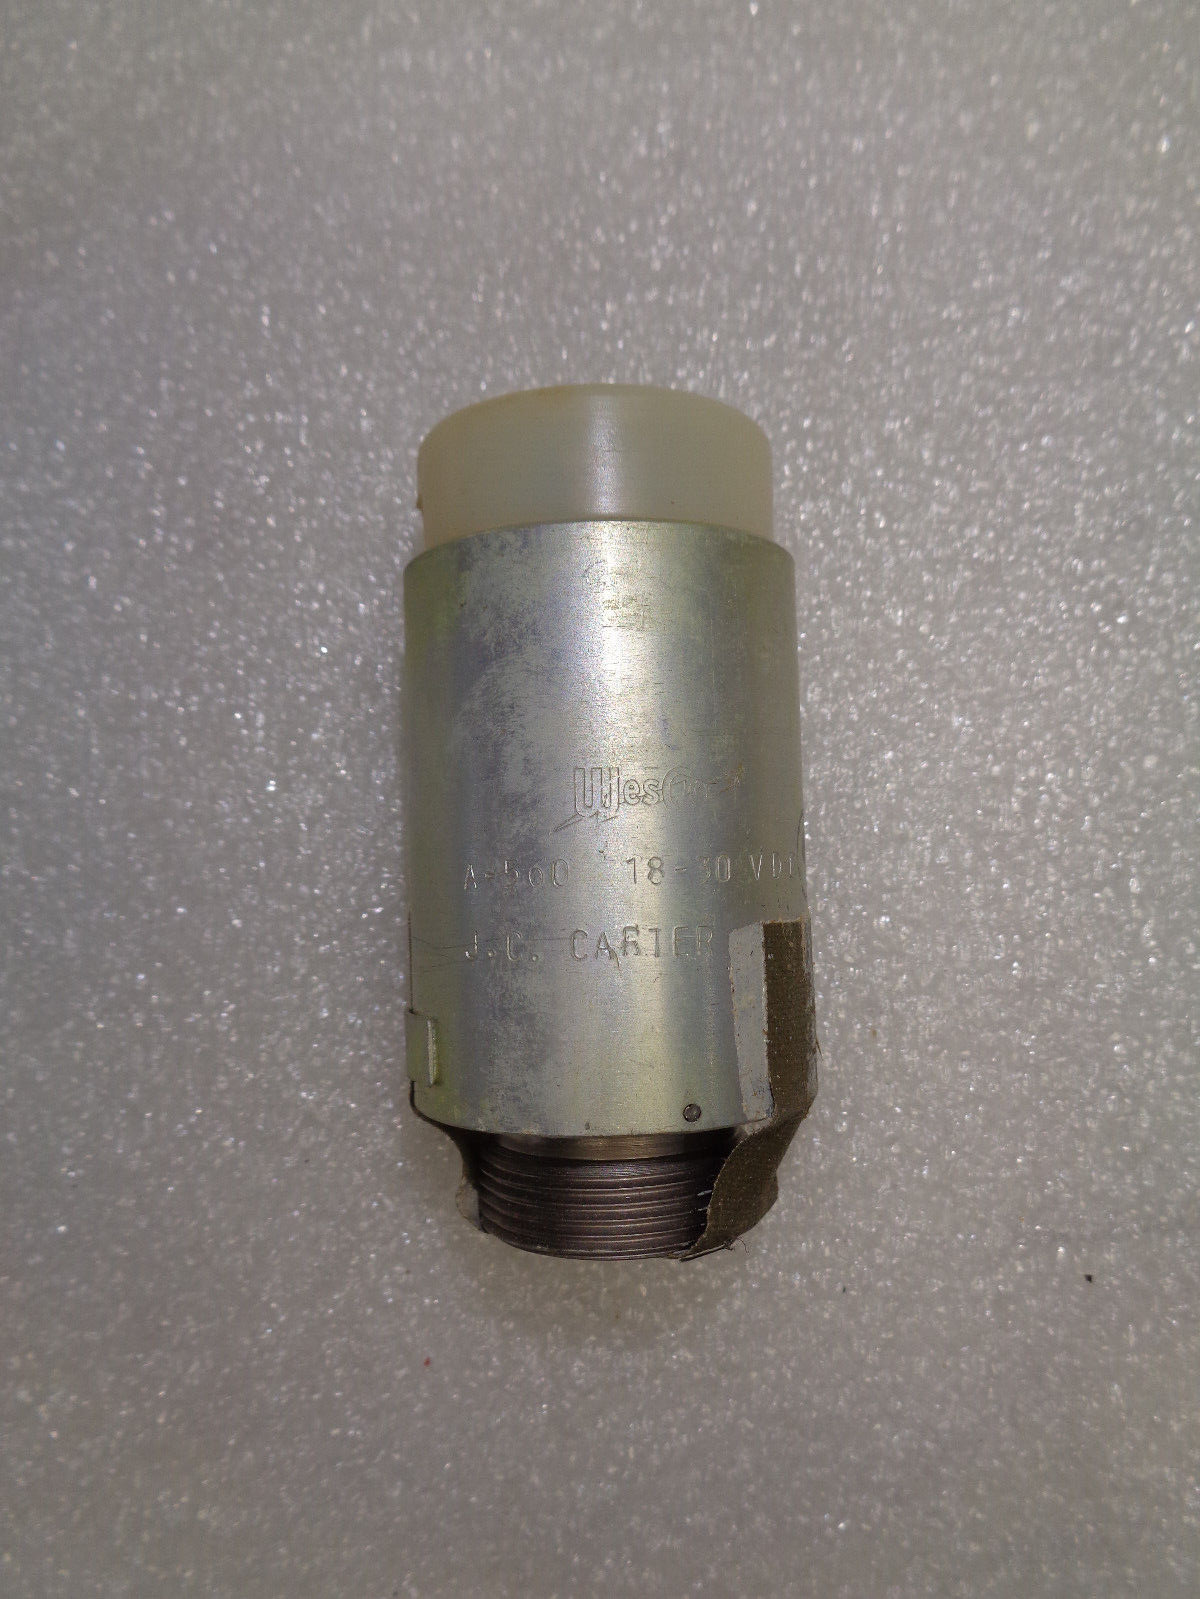 AIRCRAFT 18-30 VDC SOLENOID COIL 8563 BY J.C. CARTER NEW (LAST ONES)